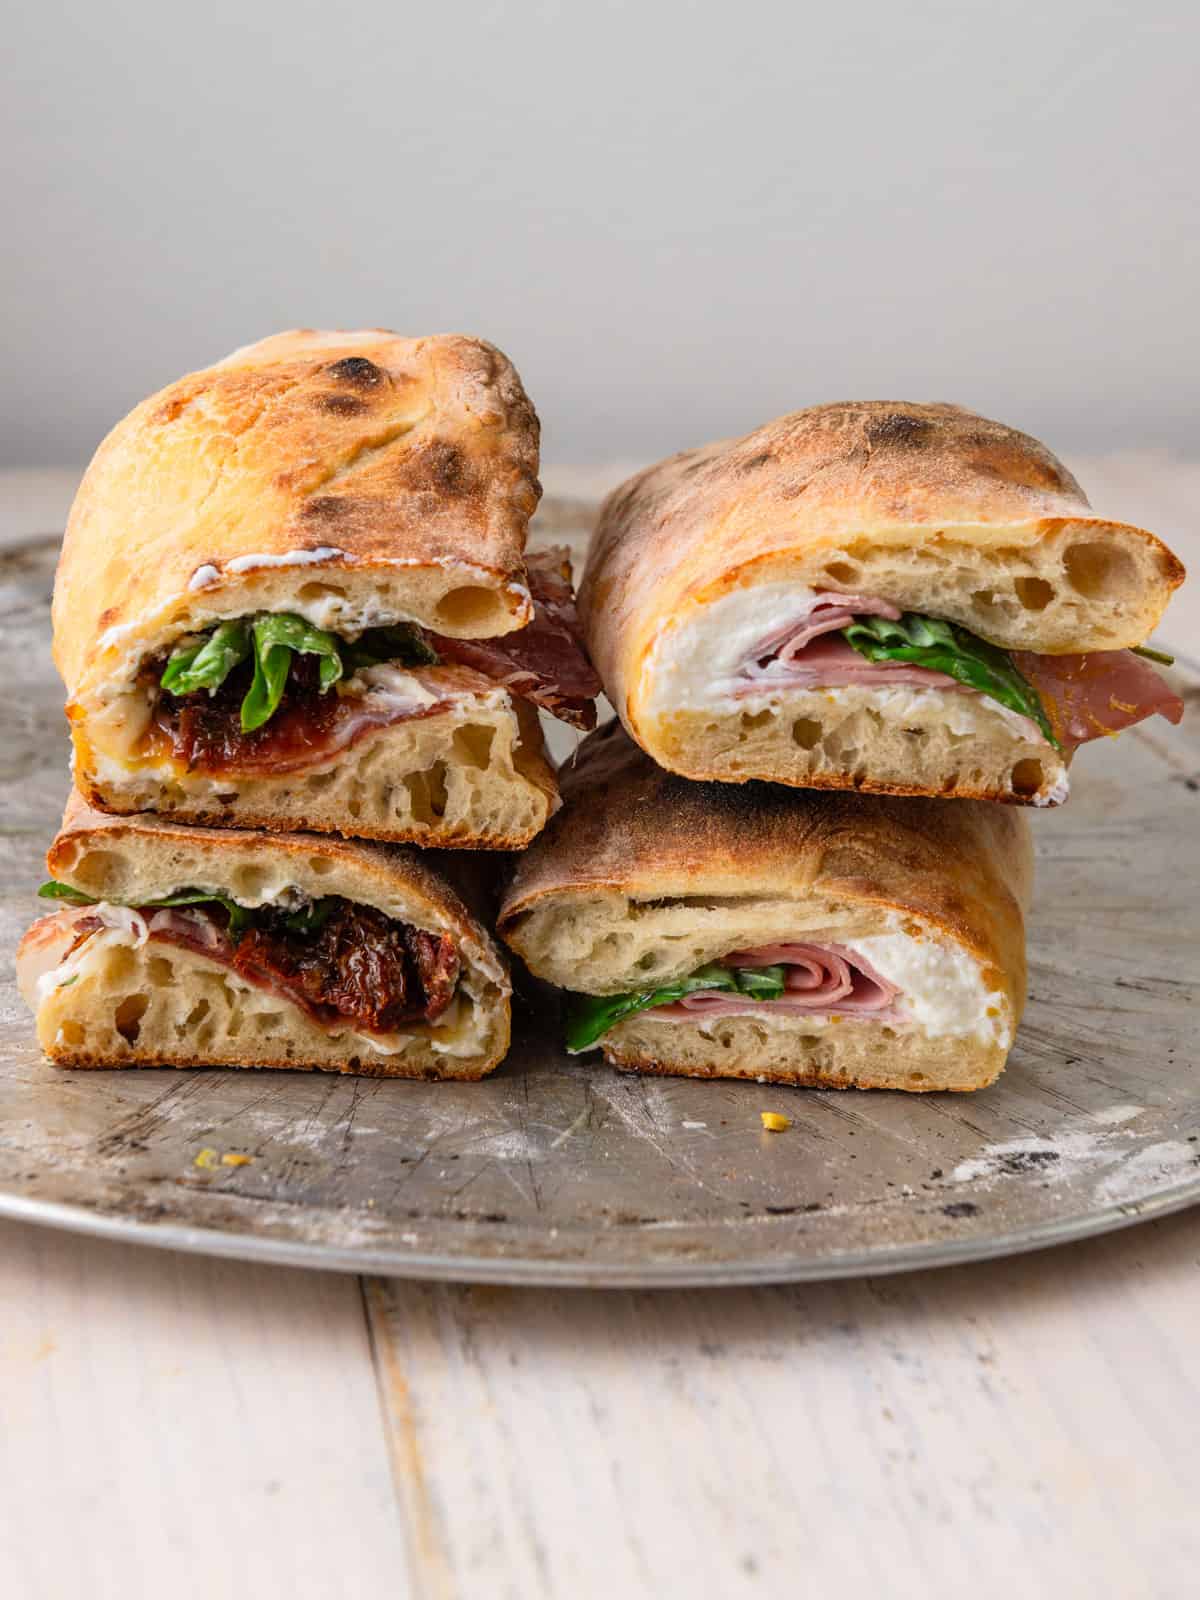 Two types of pizza sandwiches with cooked pizza dough that are filled with Italian meats, ricotta cheese and savory pesto.